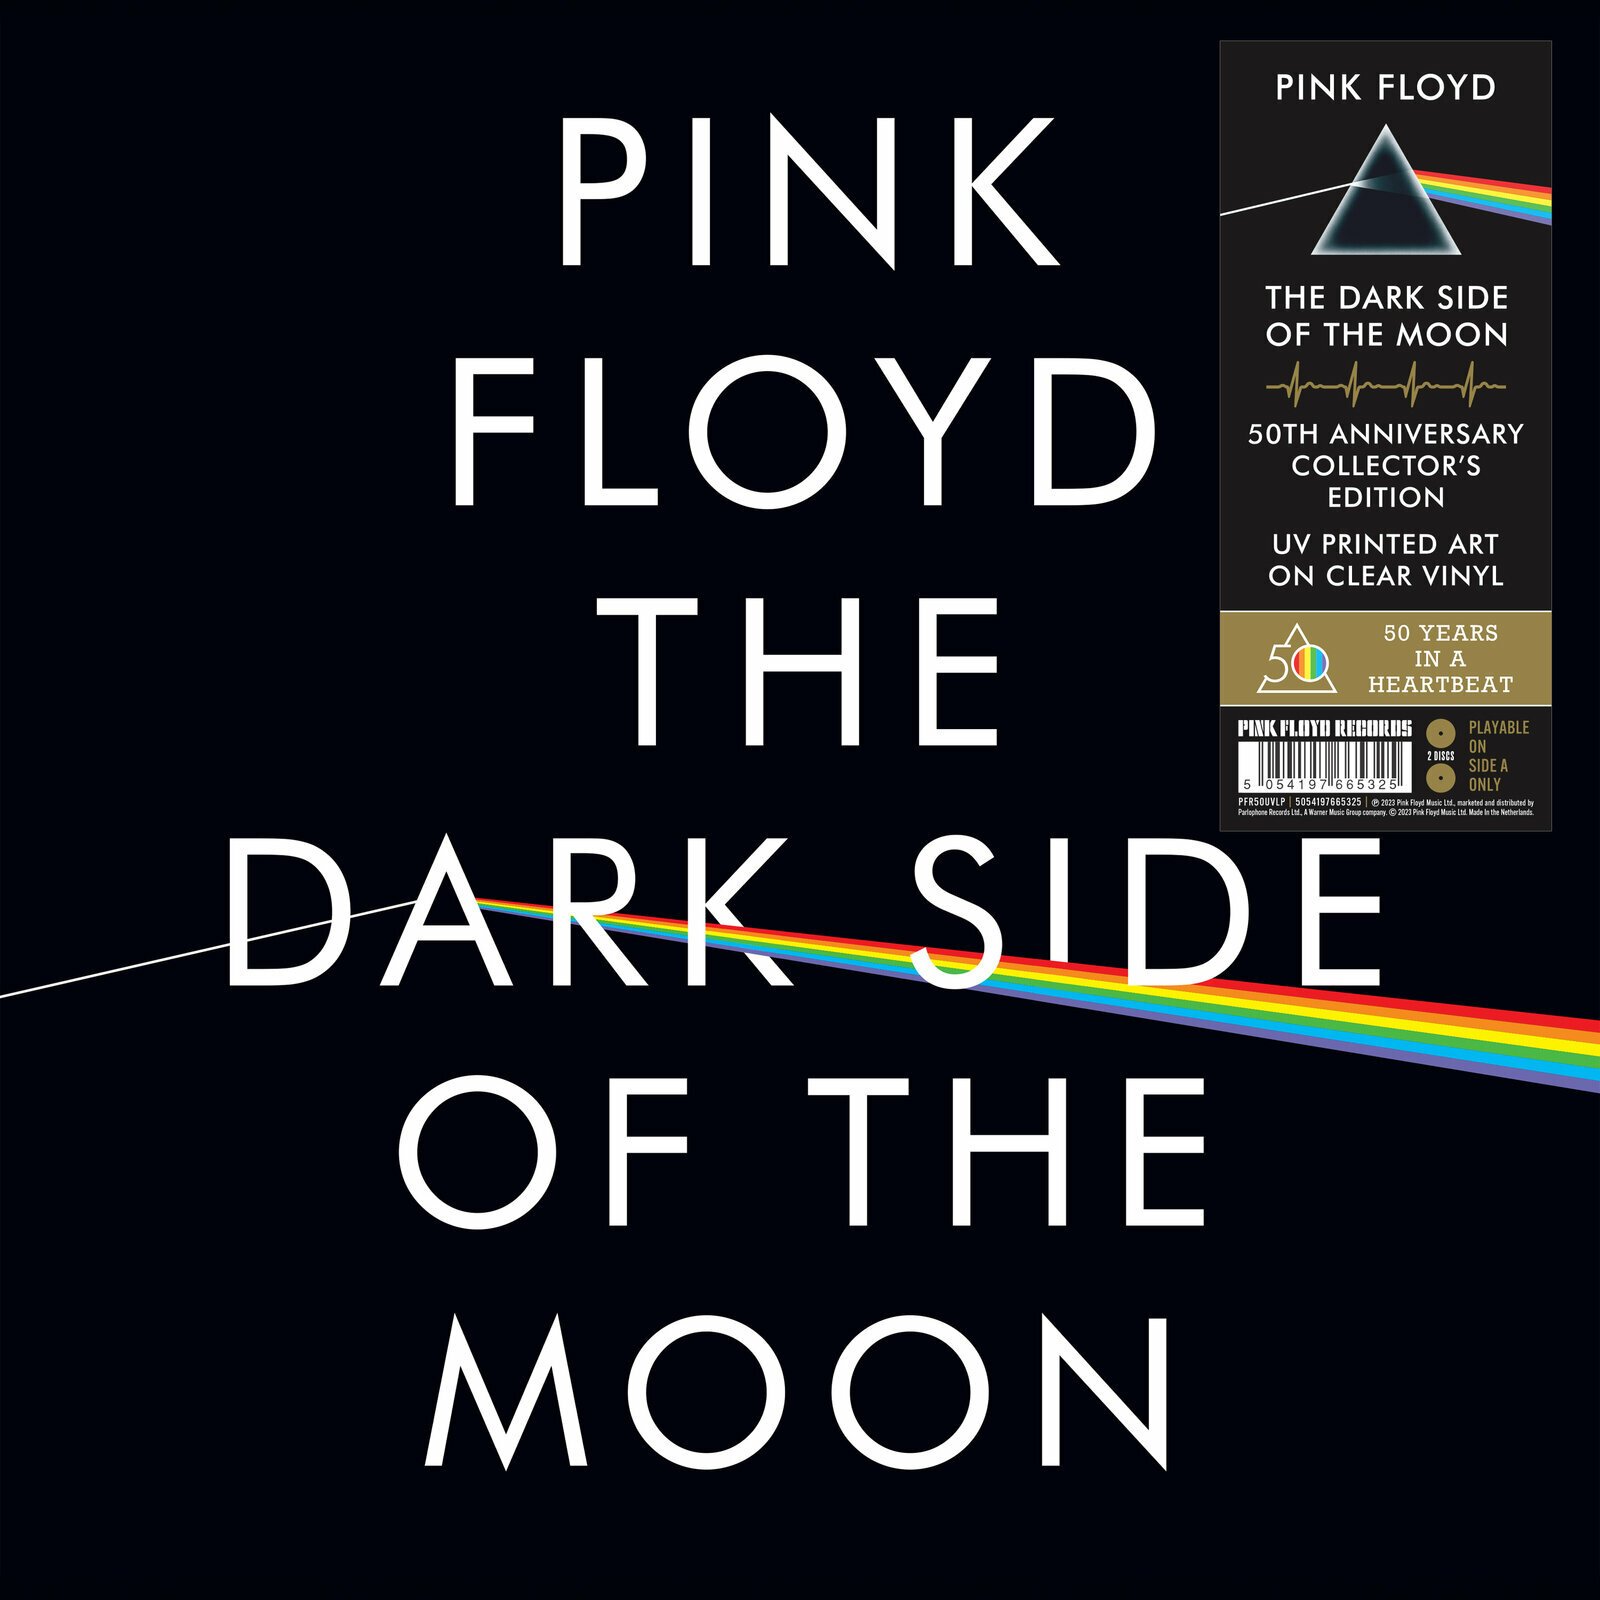 LP deska Pink Floyd - The Dark Side Of The Moon (50th Anniversary Edition) (Limited Edition) (Picture Disc) (2 LP)